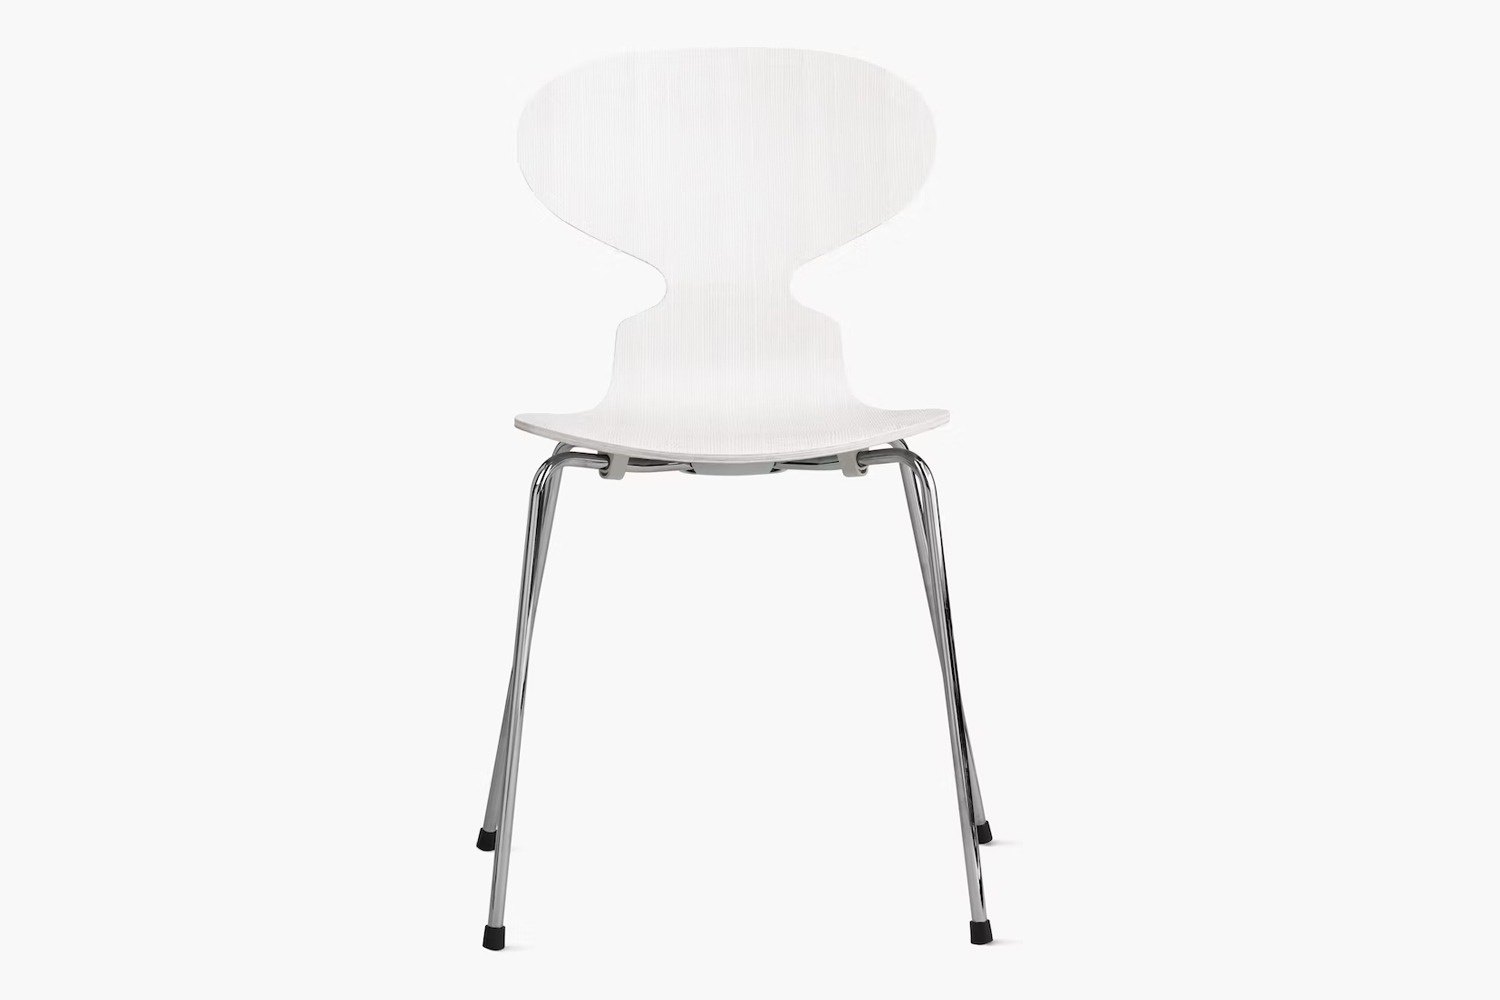 the arne jacobsen ant chair designed in \195\2 is \$4\13 at design within reach. 21